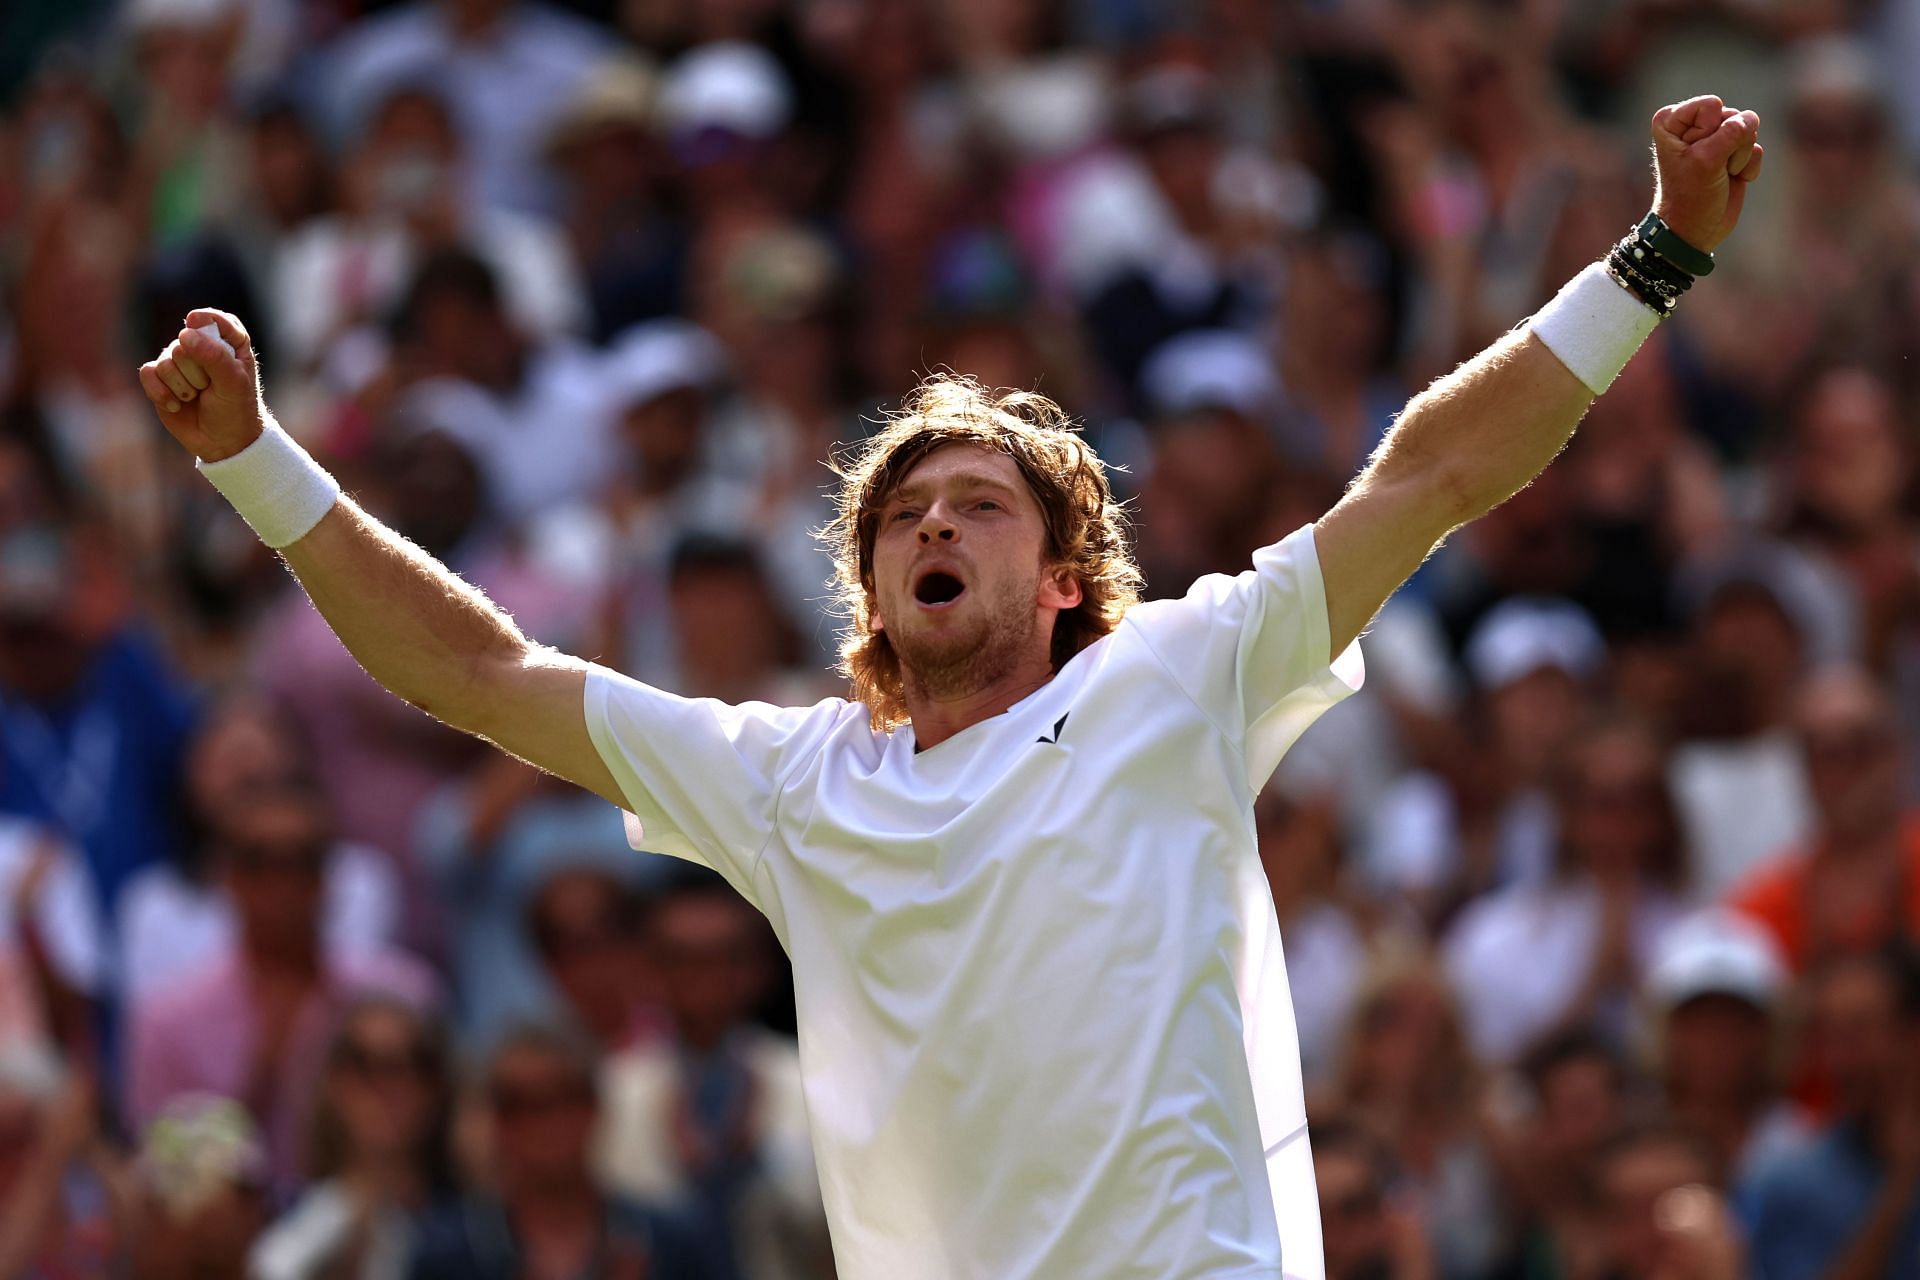 Andrey Rublev celebrates one of his wins at Wimbledon